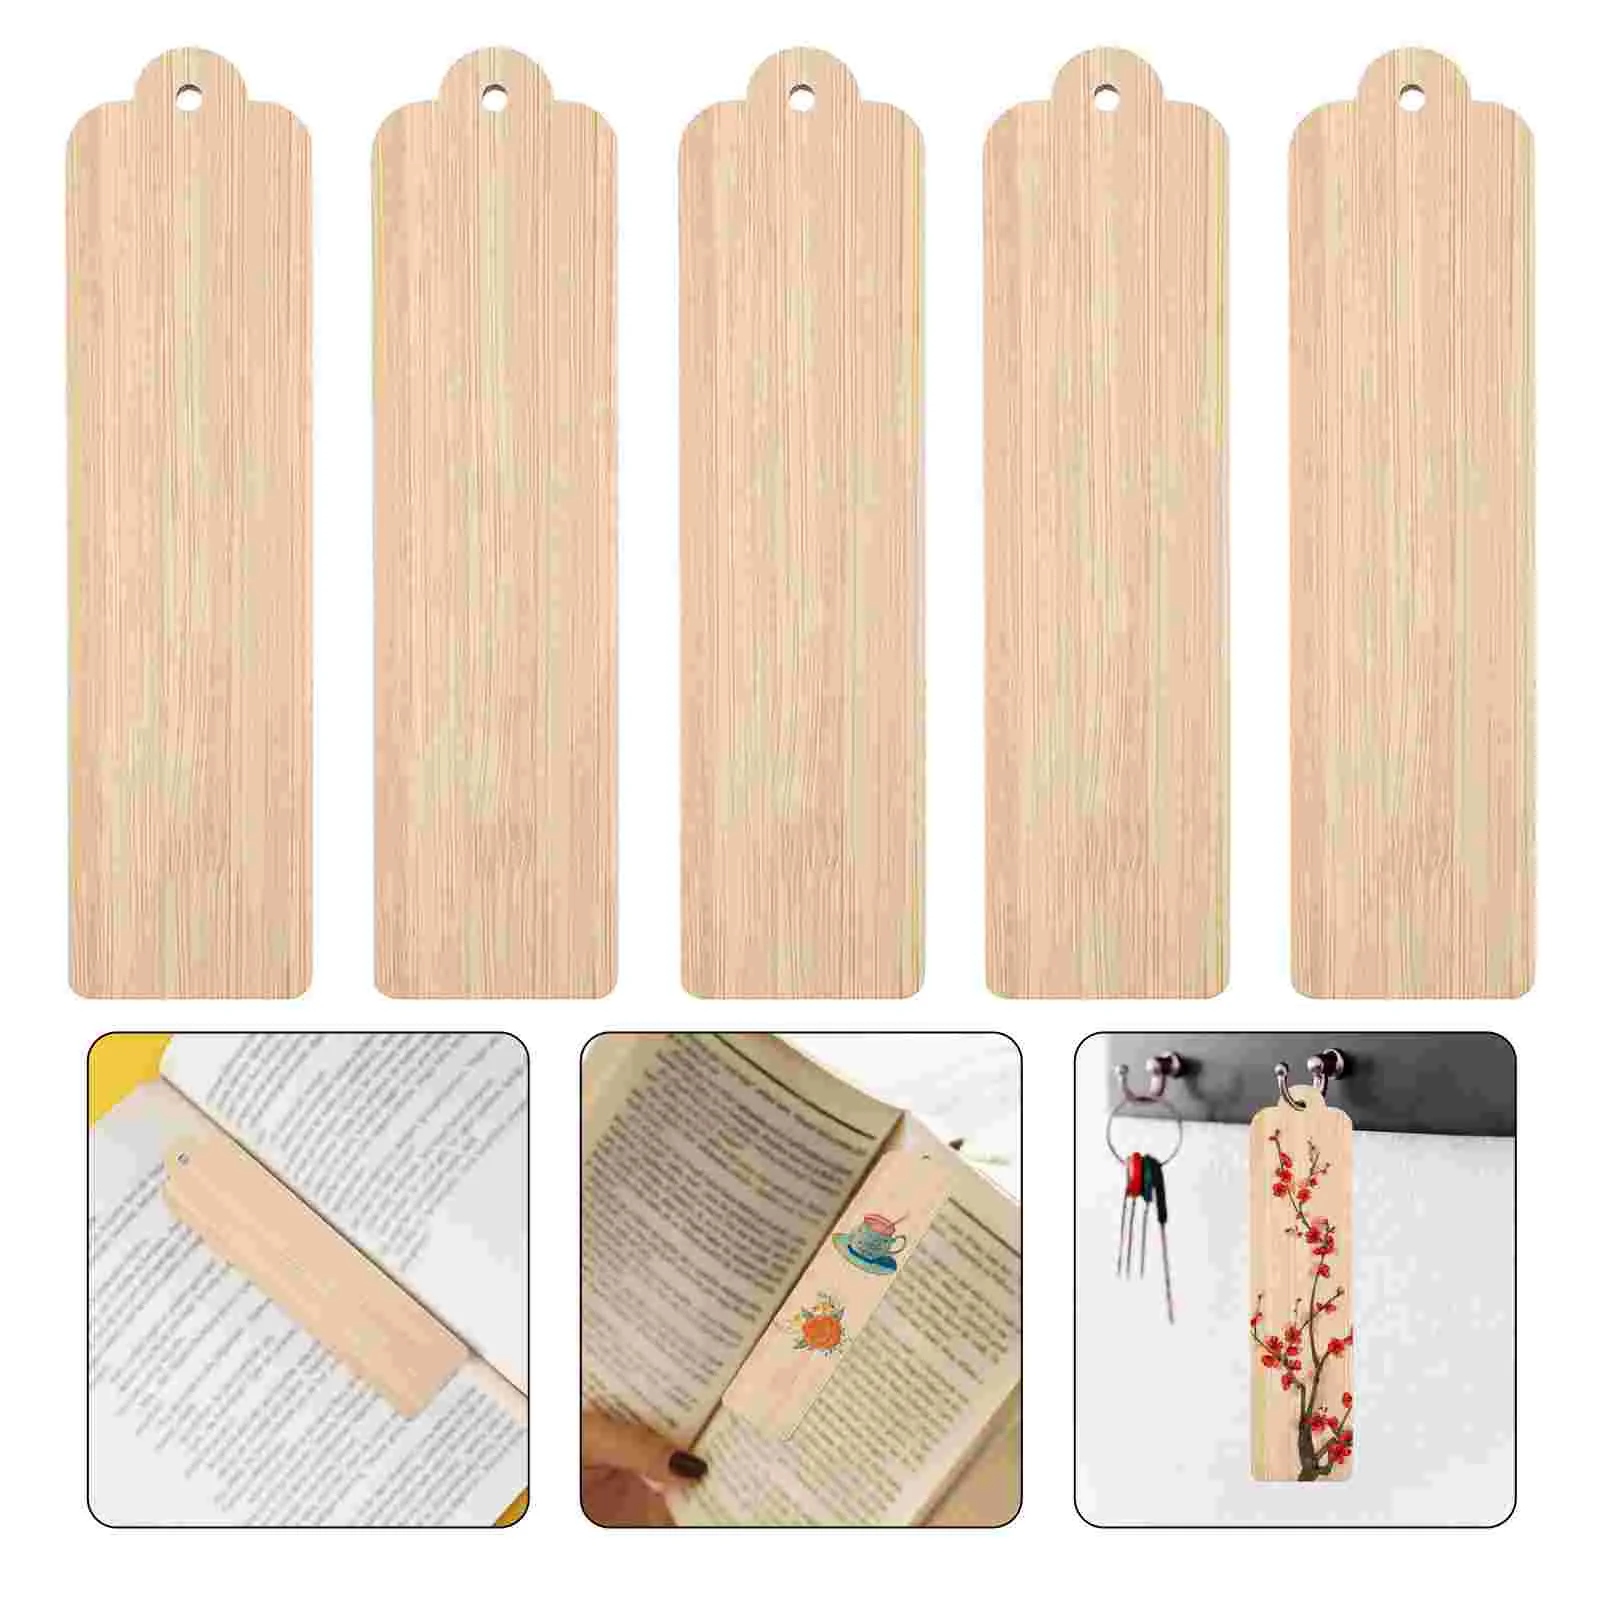 

Woodblank Bookmarksblanks Wooden Tags Crafts Unfinished Hanging Diy Signs Vinyl Kids Day Mothers Bulk Book Lovers Cute Tassels